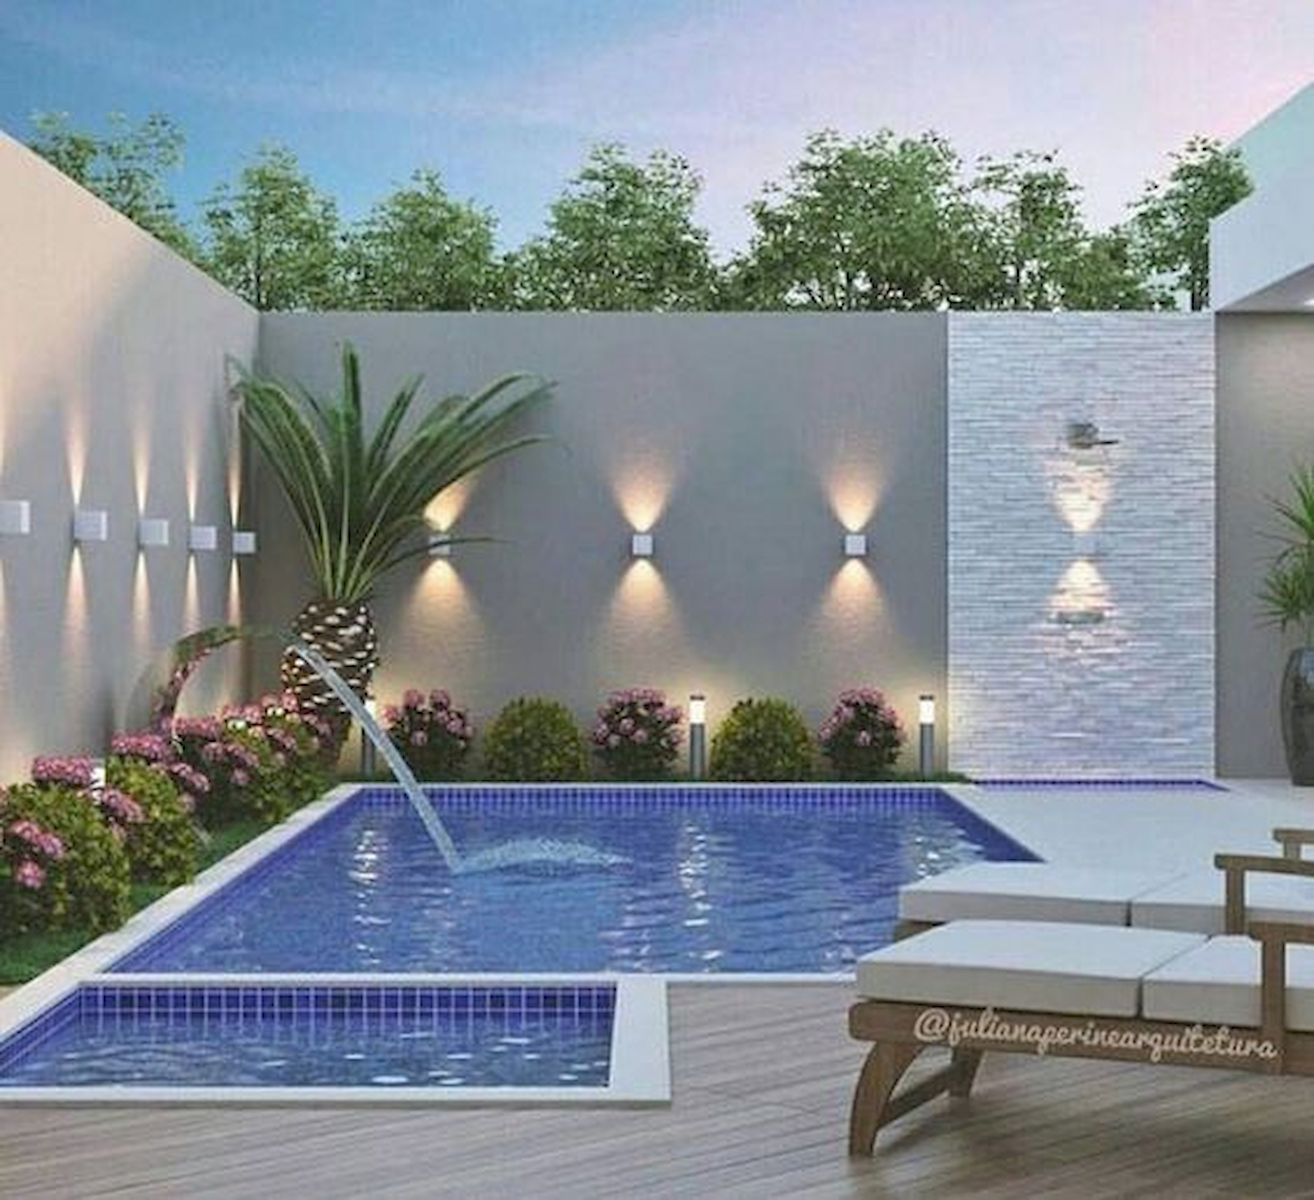 50 Gorgeous Small Swimming Pool Ideas For Small Backyard (9)